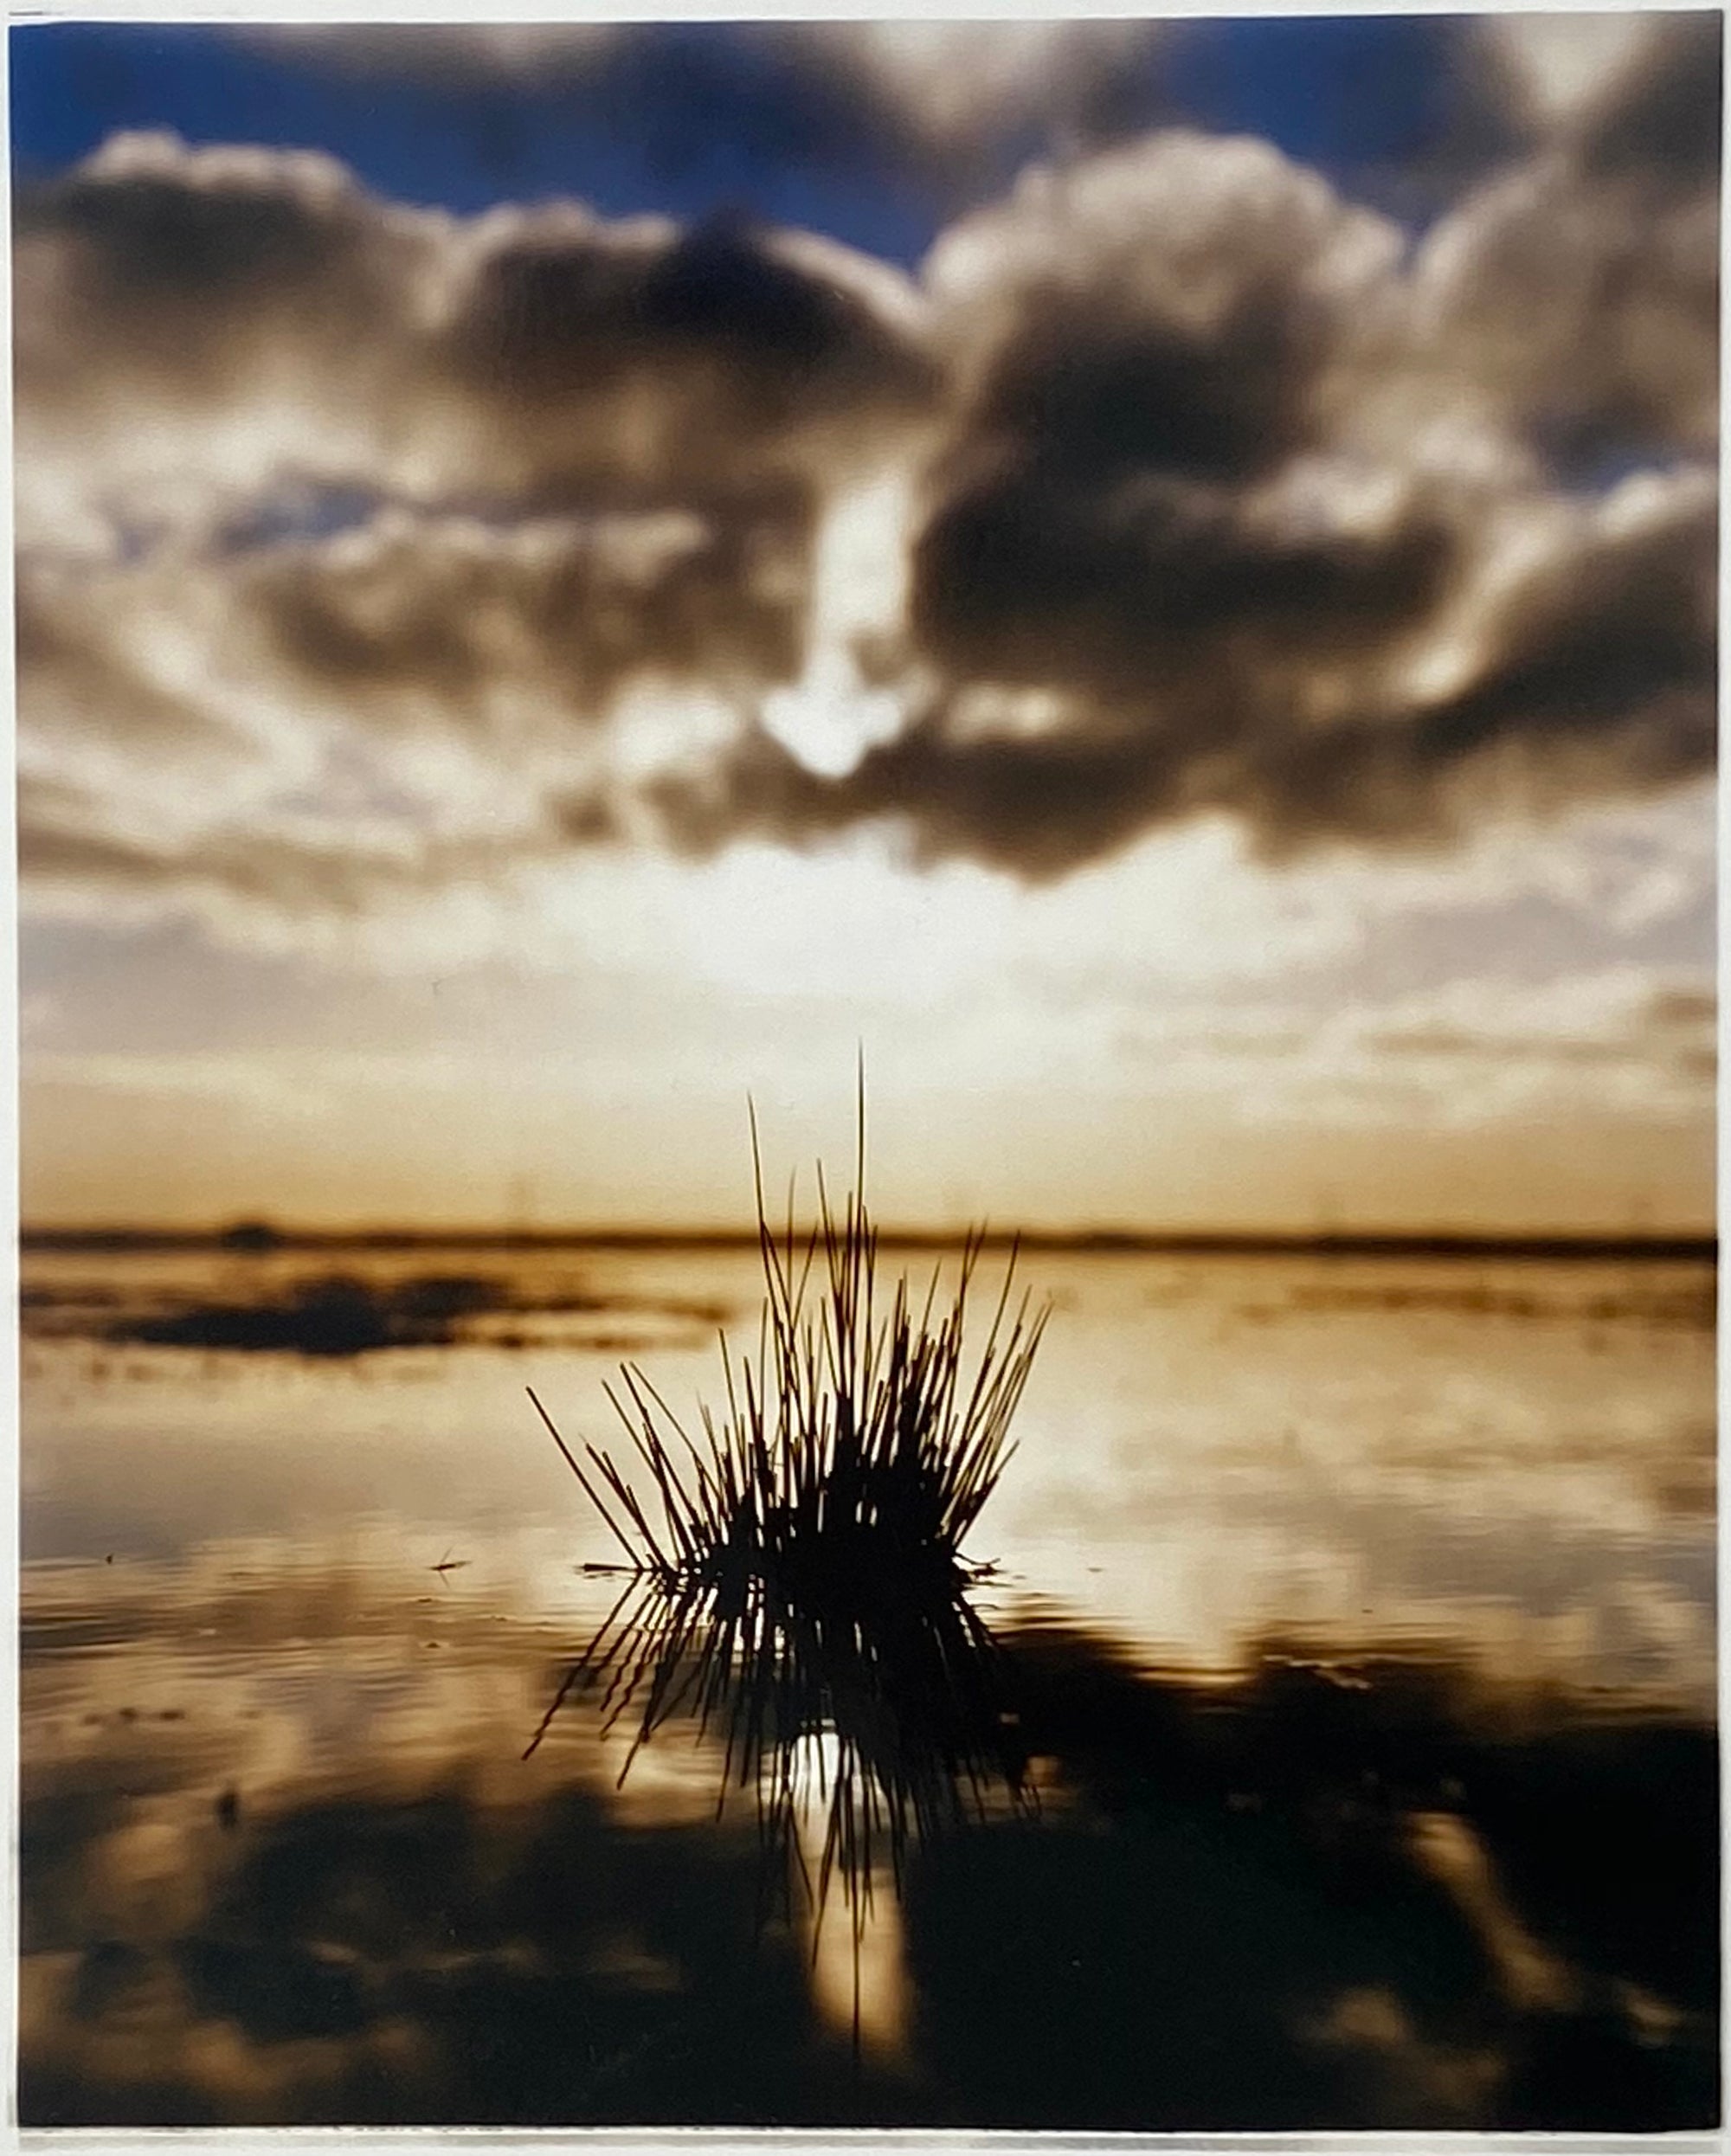 Landscape photography from the fenlands with a cloudy sky reflecting in water.